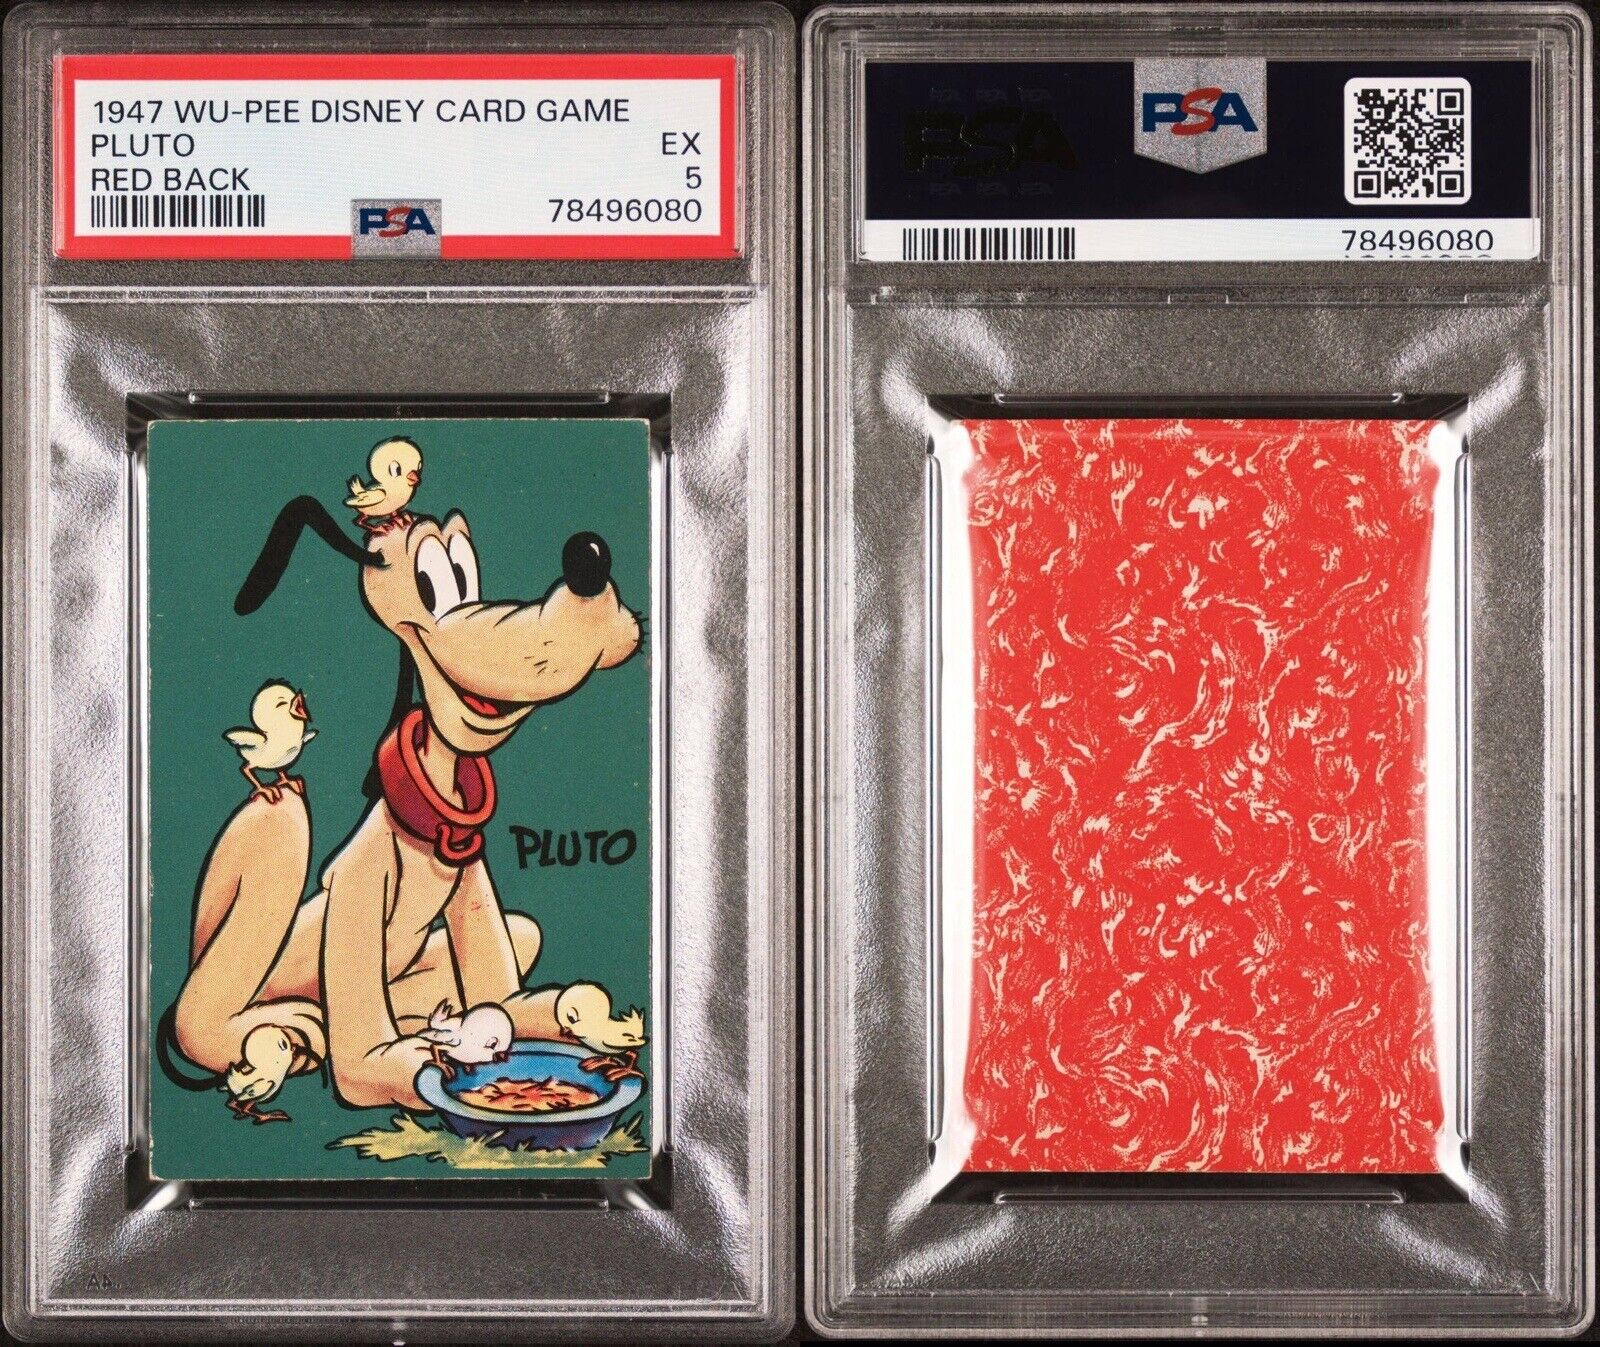 EXTREMELY RARE 1947 WU-PEE DISNEY CARD GAME PLUTO CARD PSA 5 EXCELLENT 